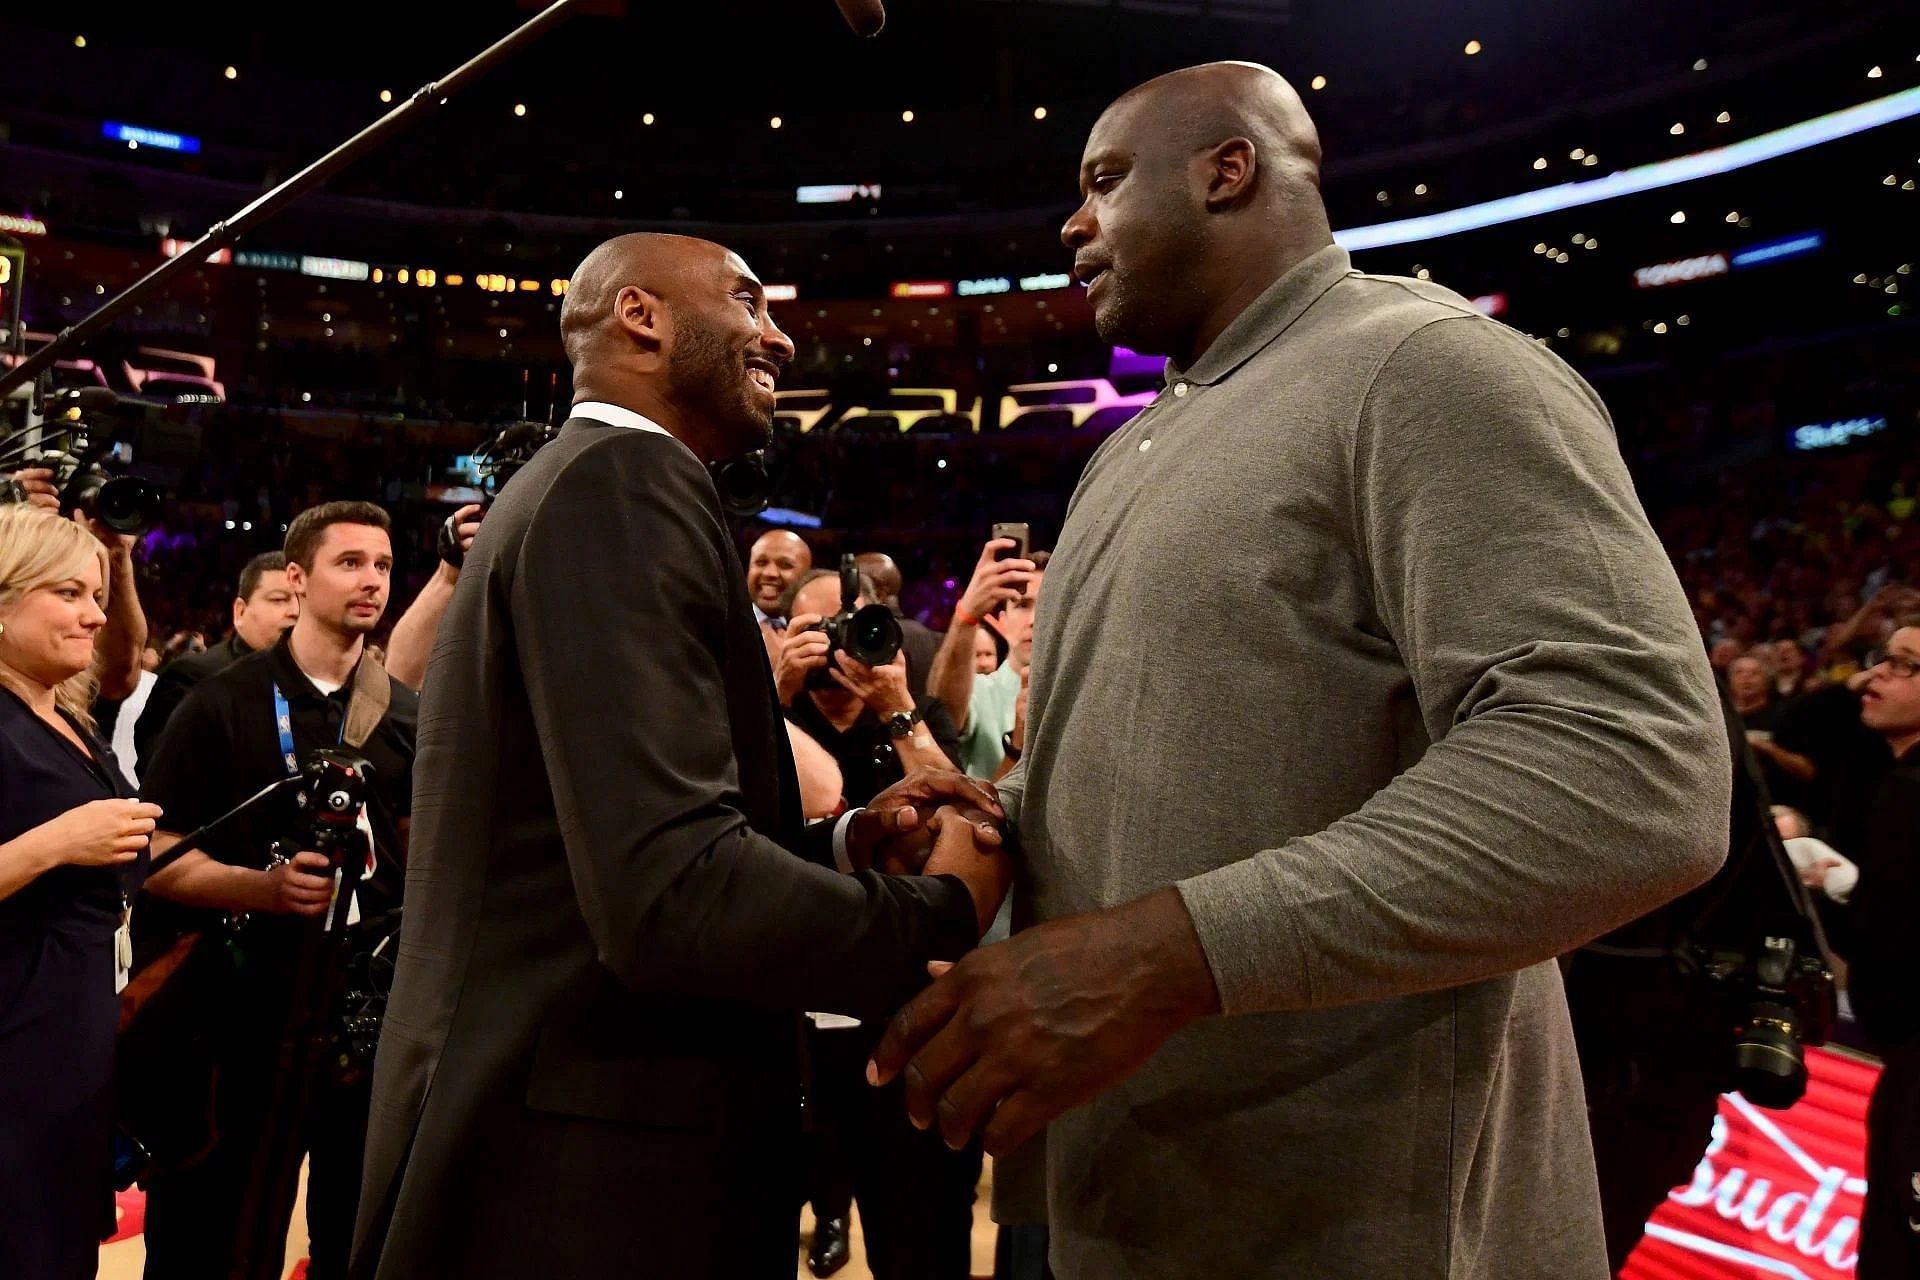 Shaquille O'Neal: "Sacrificing my game for years": Kobe Bryant once clapped  back at Shaquille O'Neal's accusation of being selfish